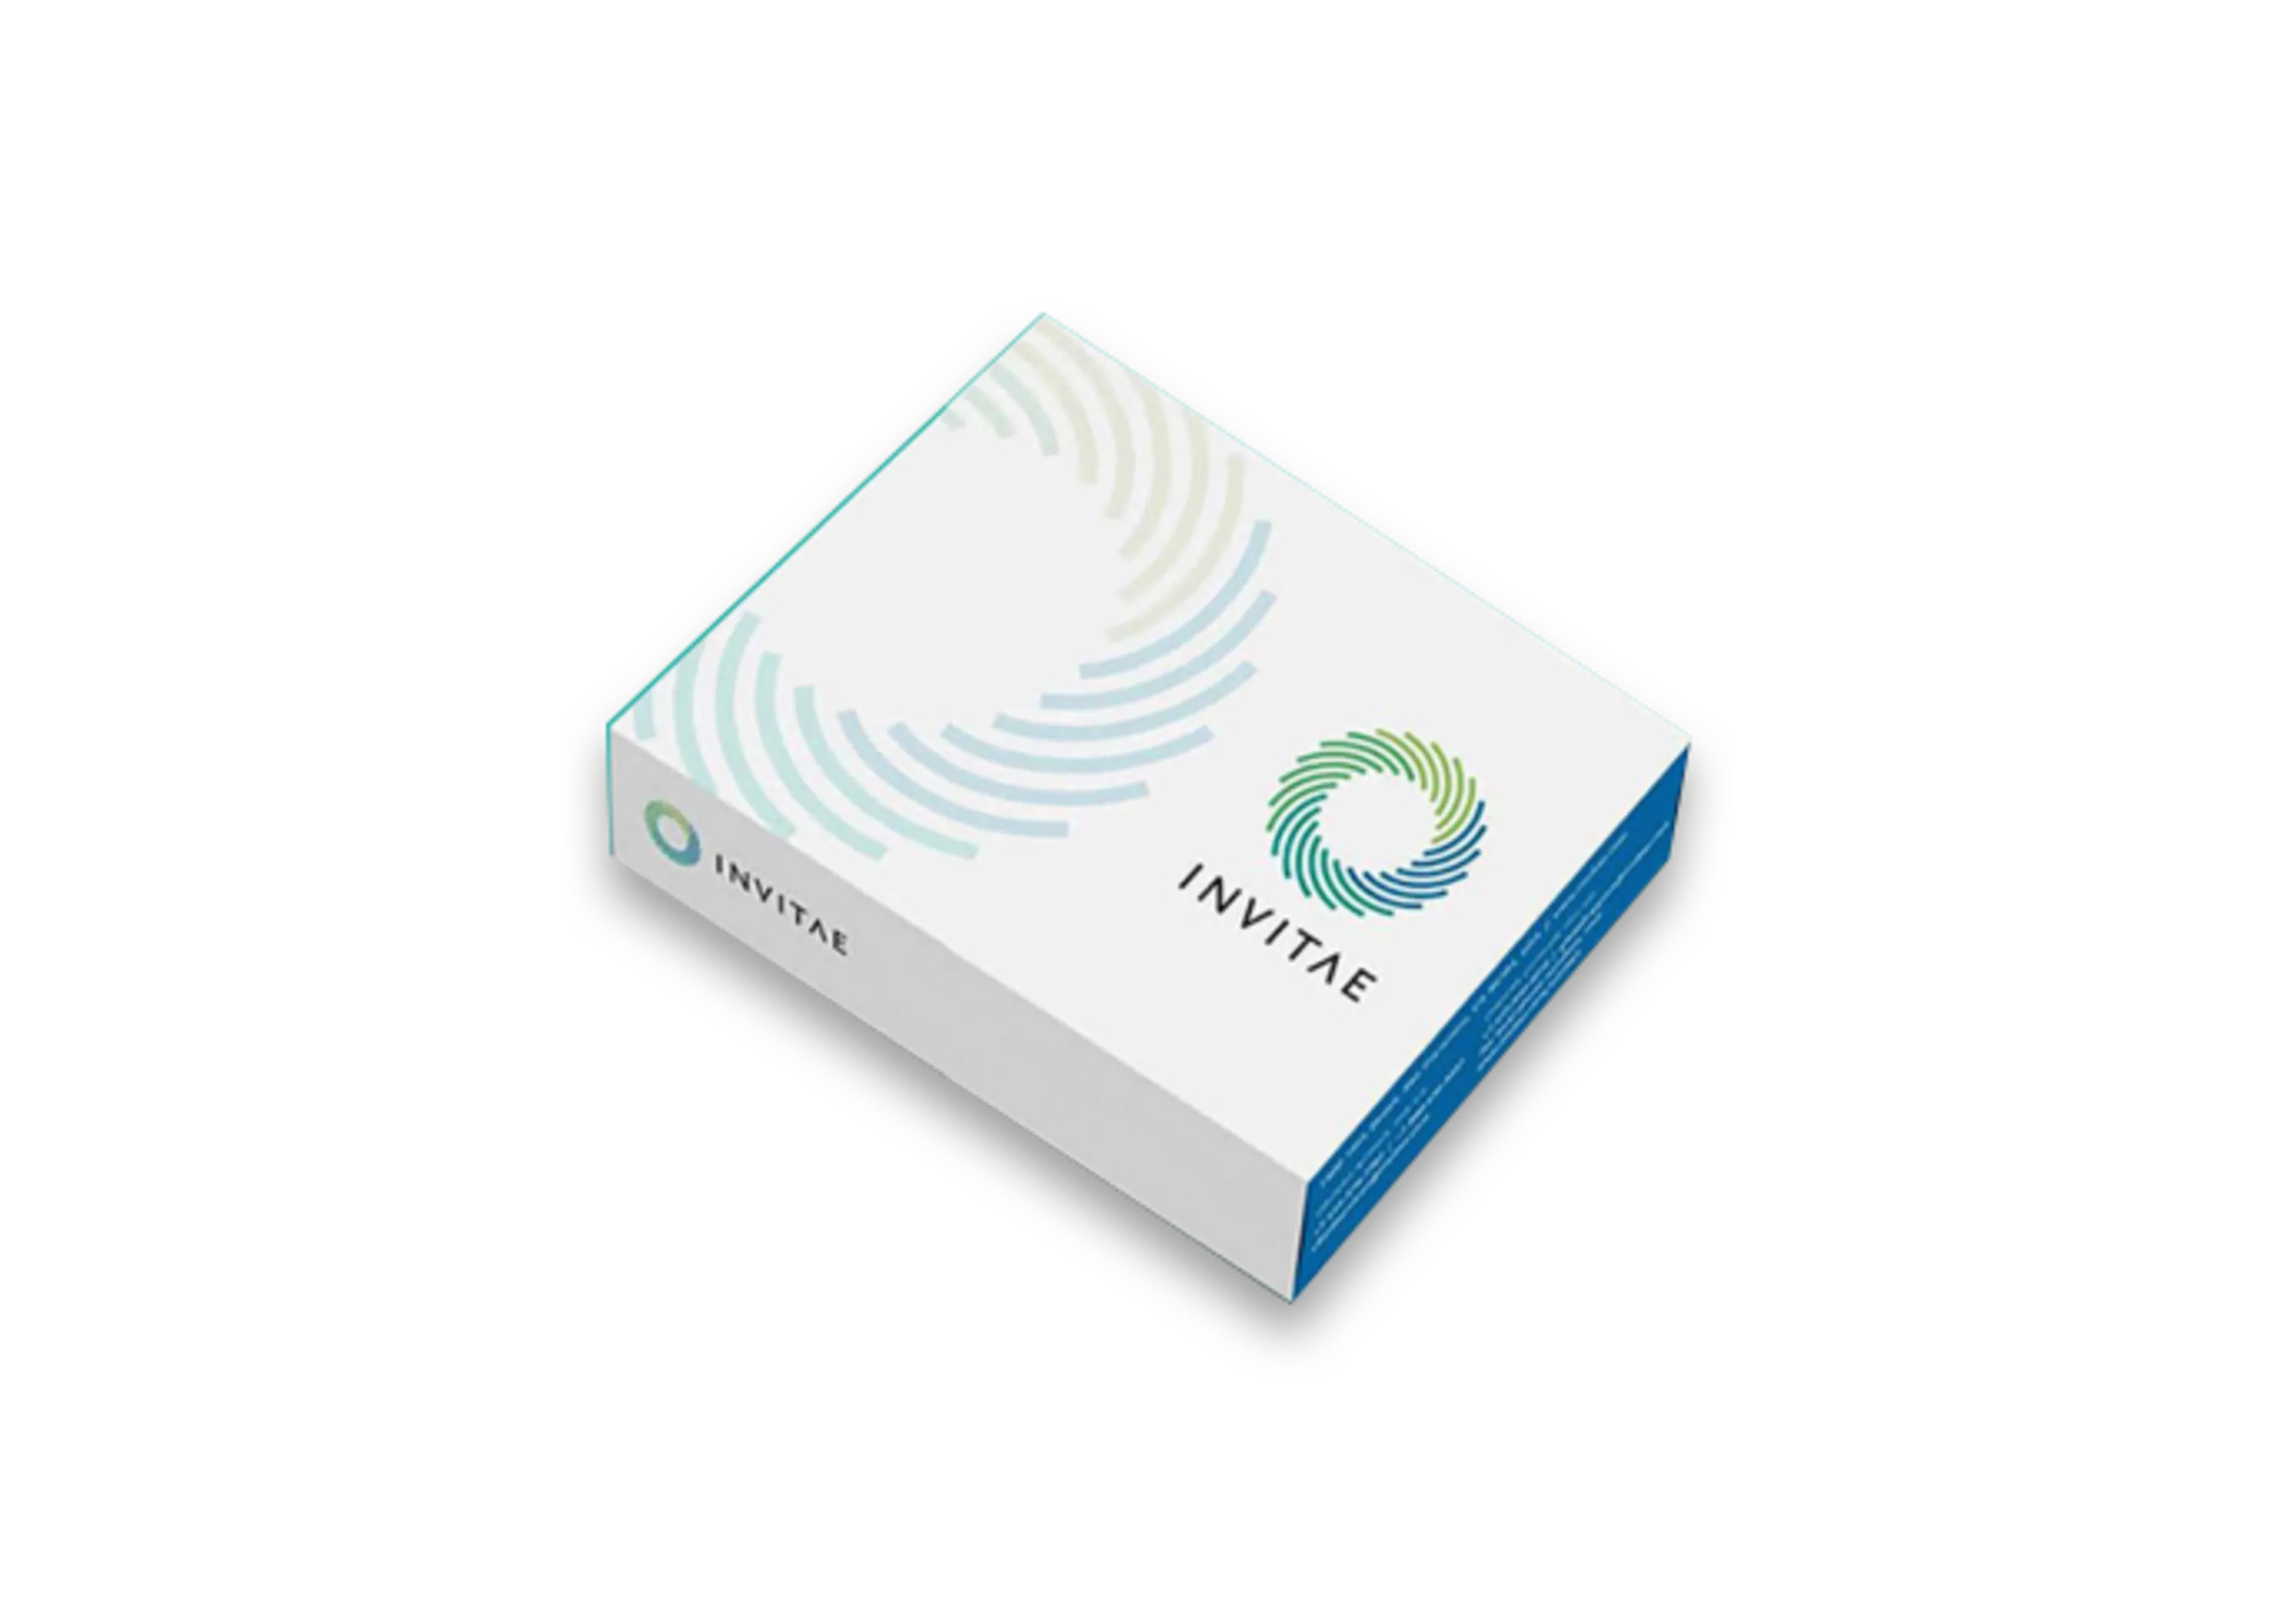 Invitae kit box for product card